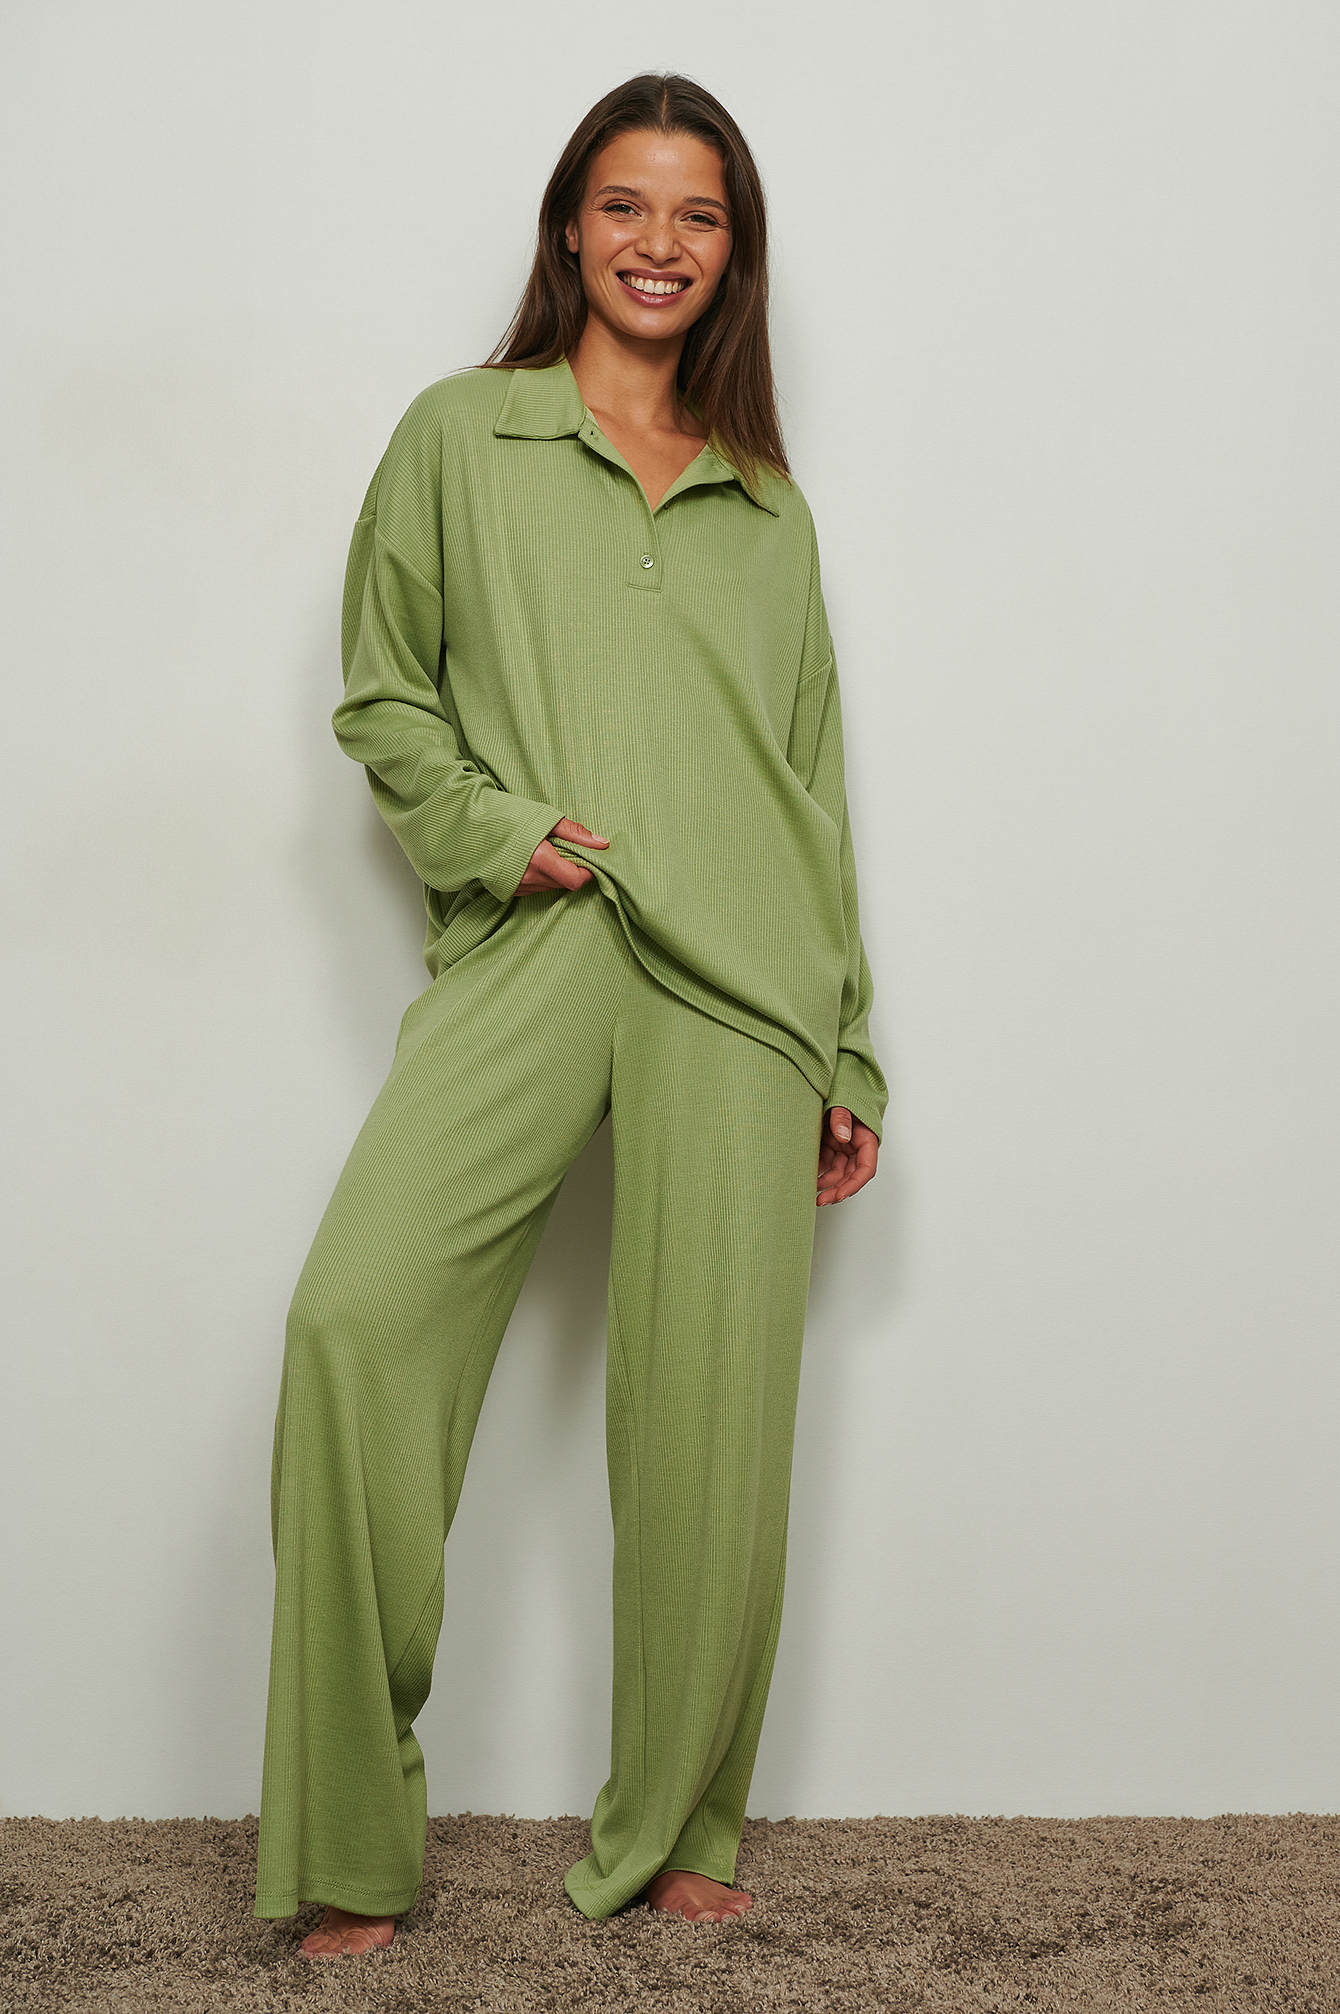 Loose Fit Ribbed Loungewear Pants Outfit